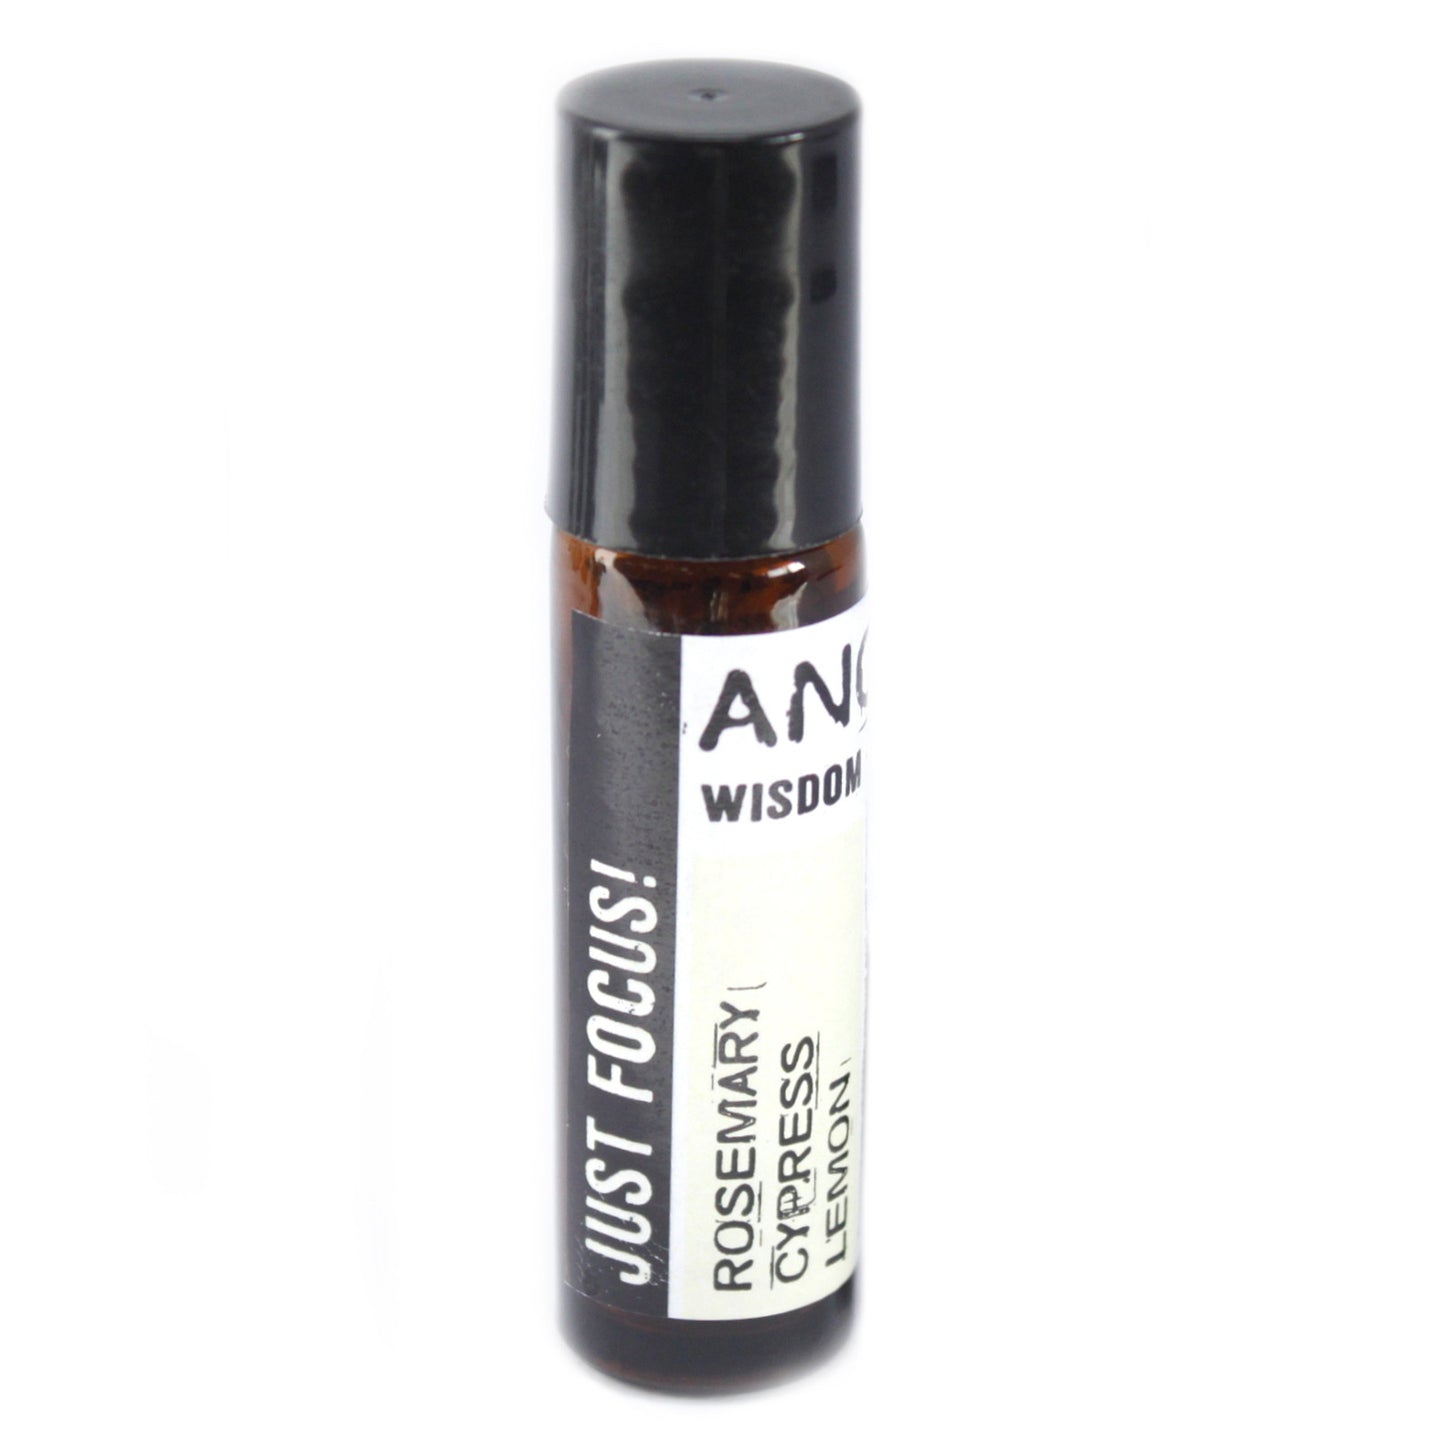 10ml Roll On Essential Oil Blend - Just Focus!